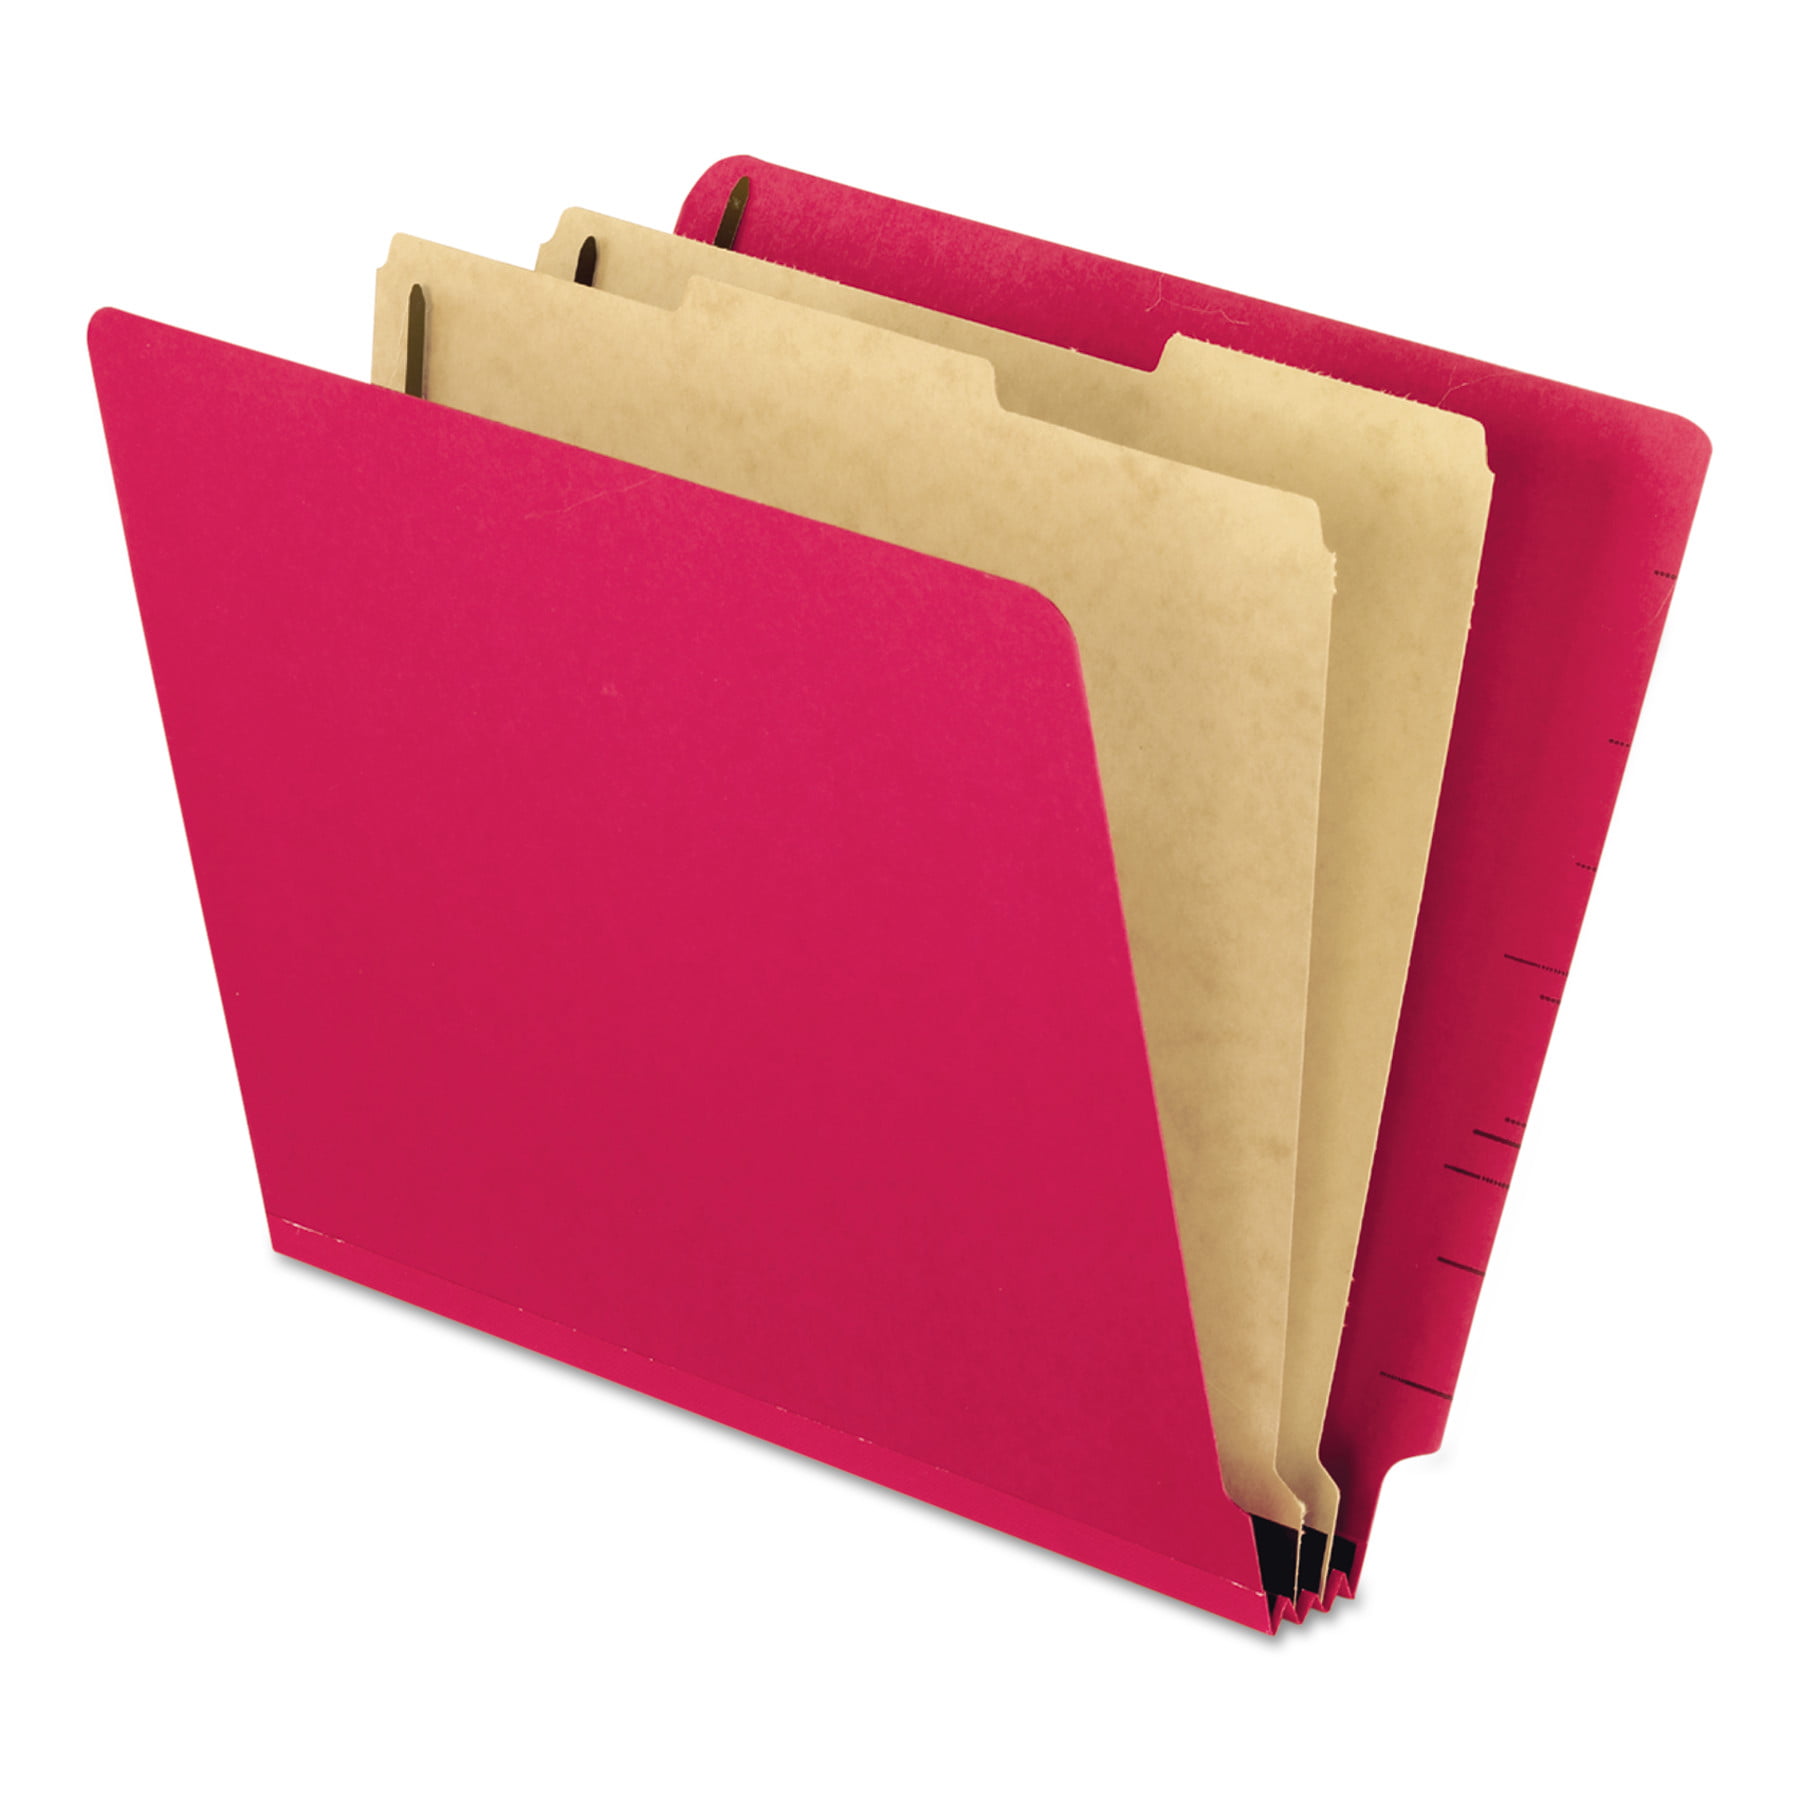 No Dividers Red Box of 25 2 Expansion Economy Pressboard Classification File Folder Full End Tab Legal Size 2 Metal Fasteners Top Position